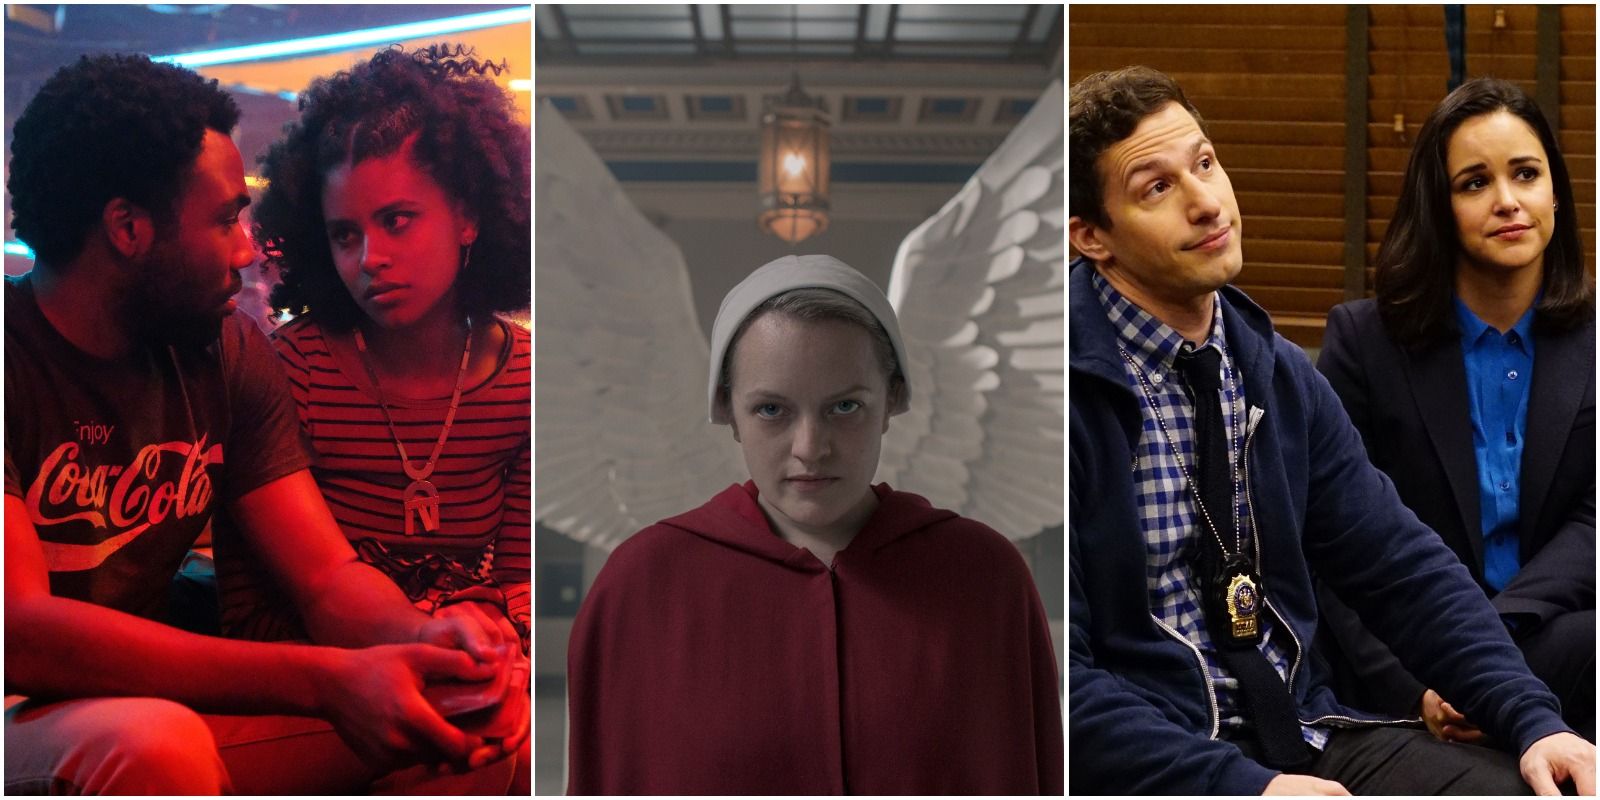 Top 10 TV Shows From The 2010s On Hulu To Watch, According To IMDb